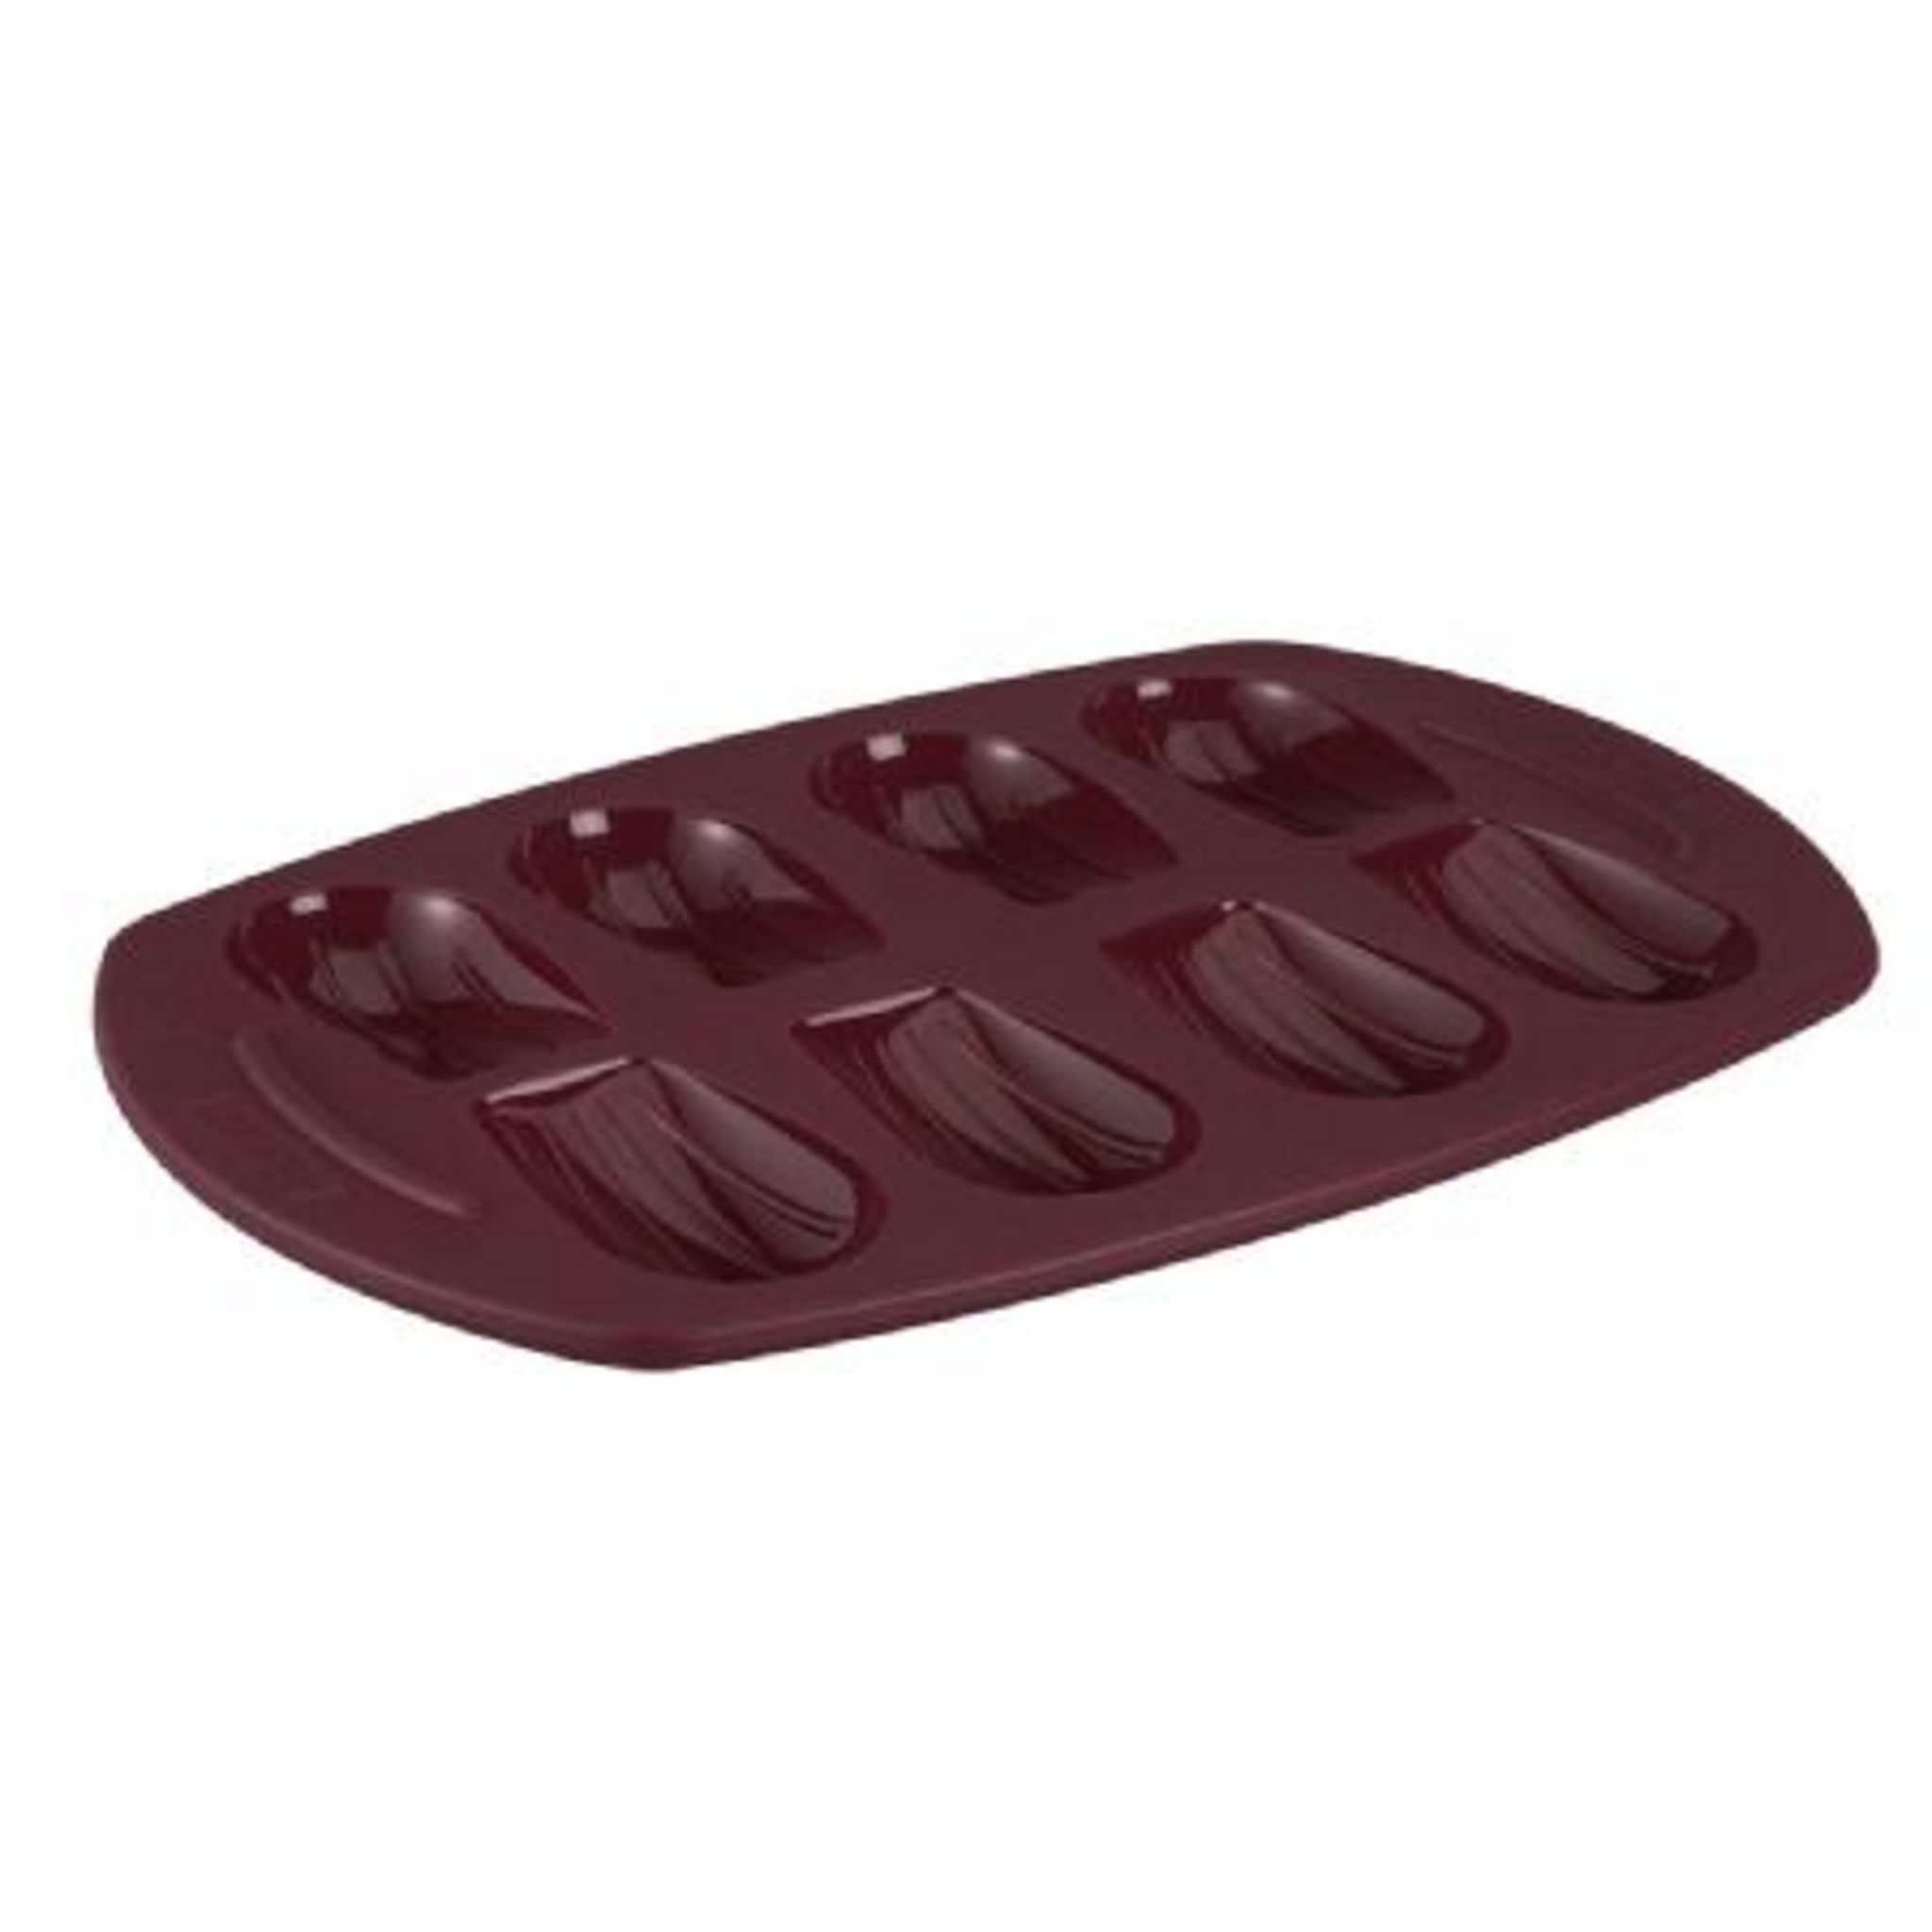 Moule silicone 8 madeleines Tefal Proflex rouge